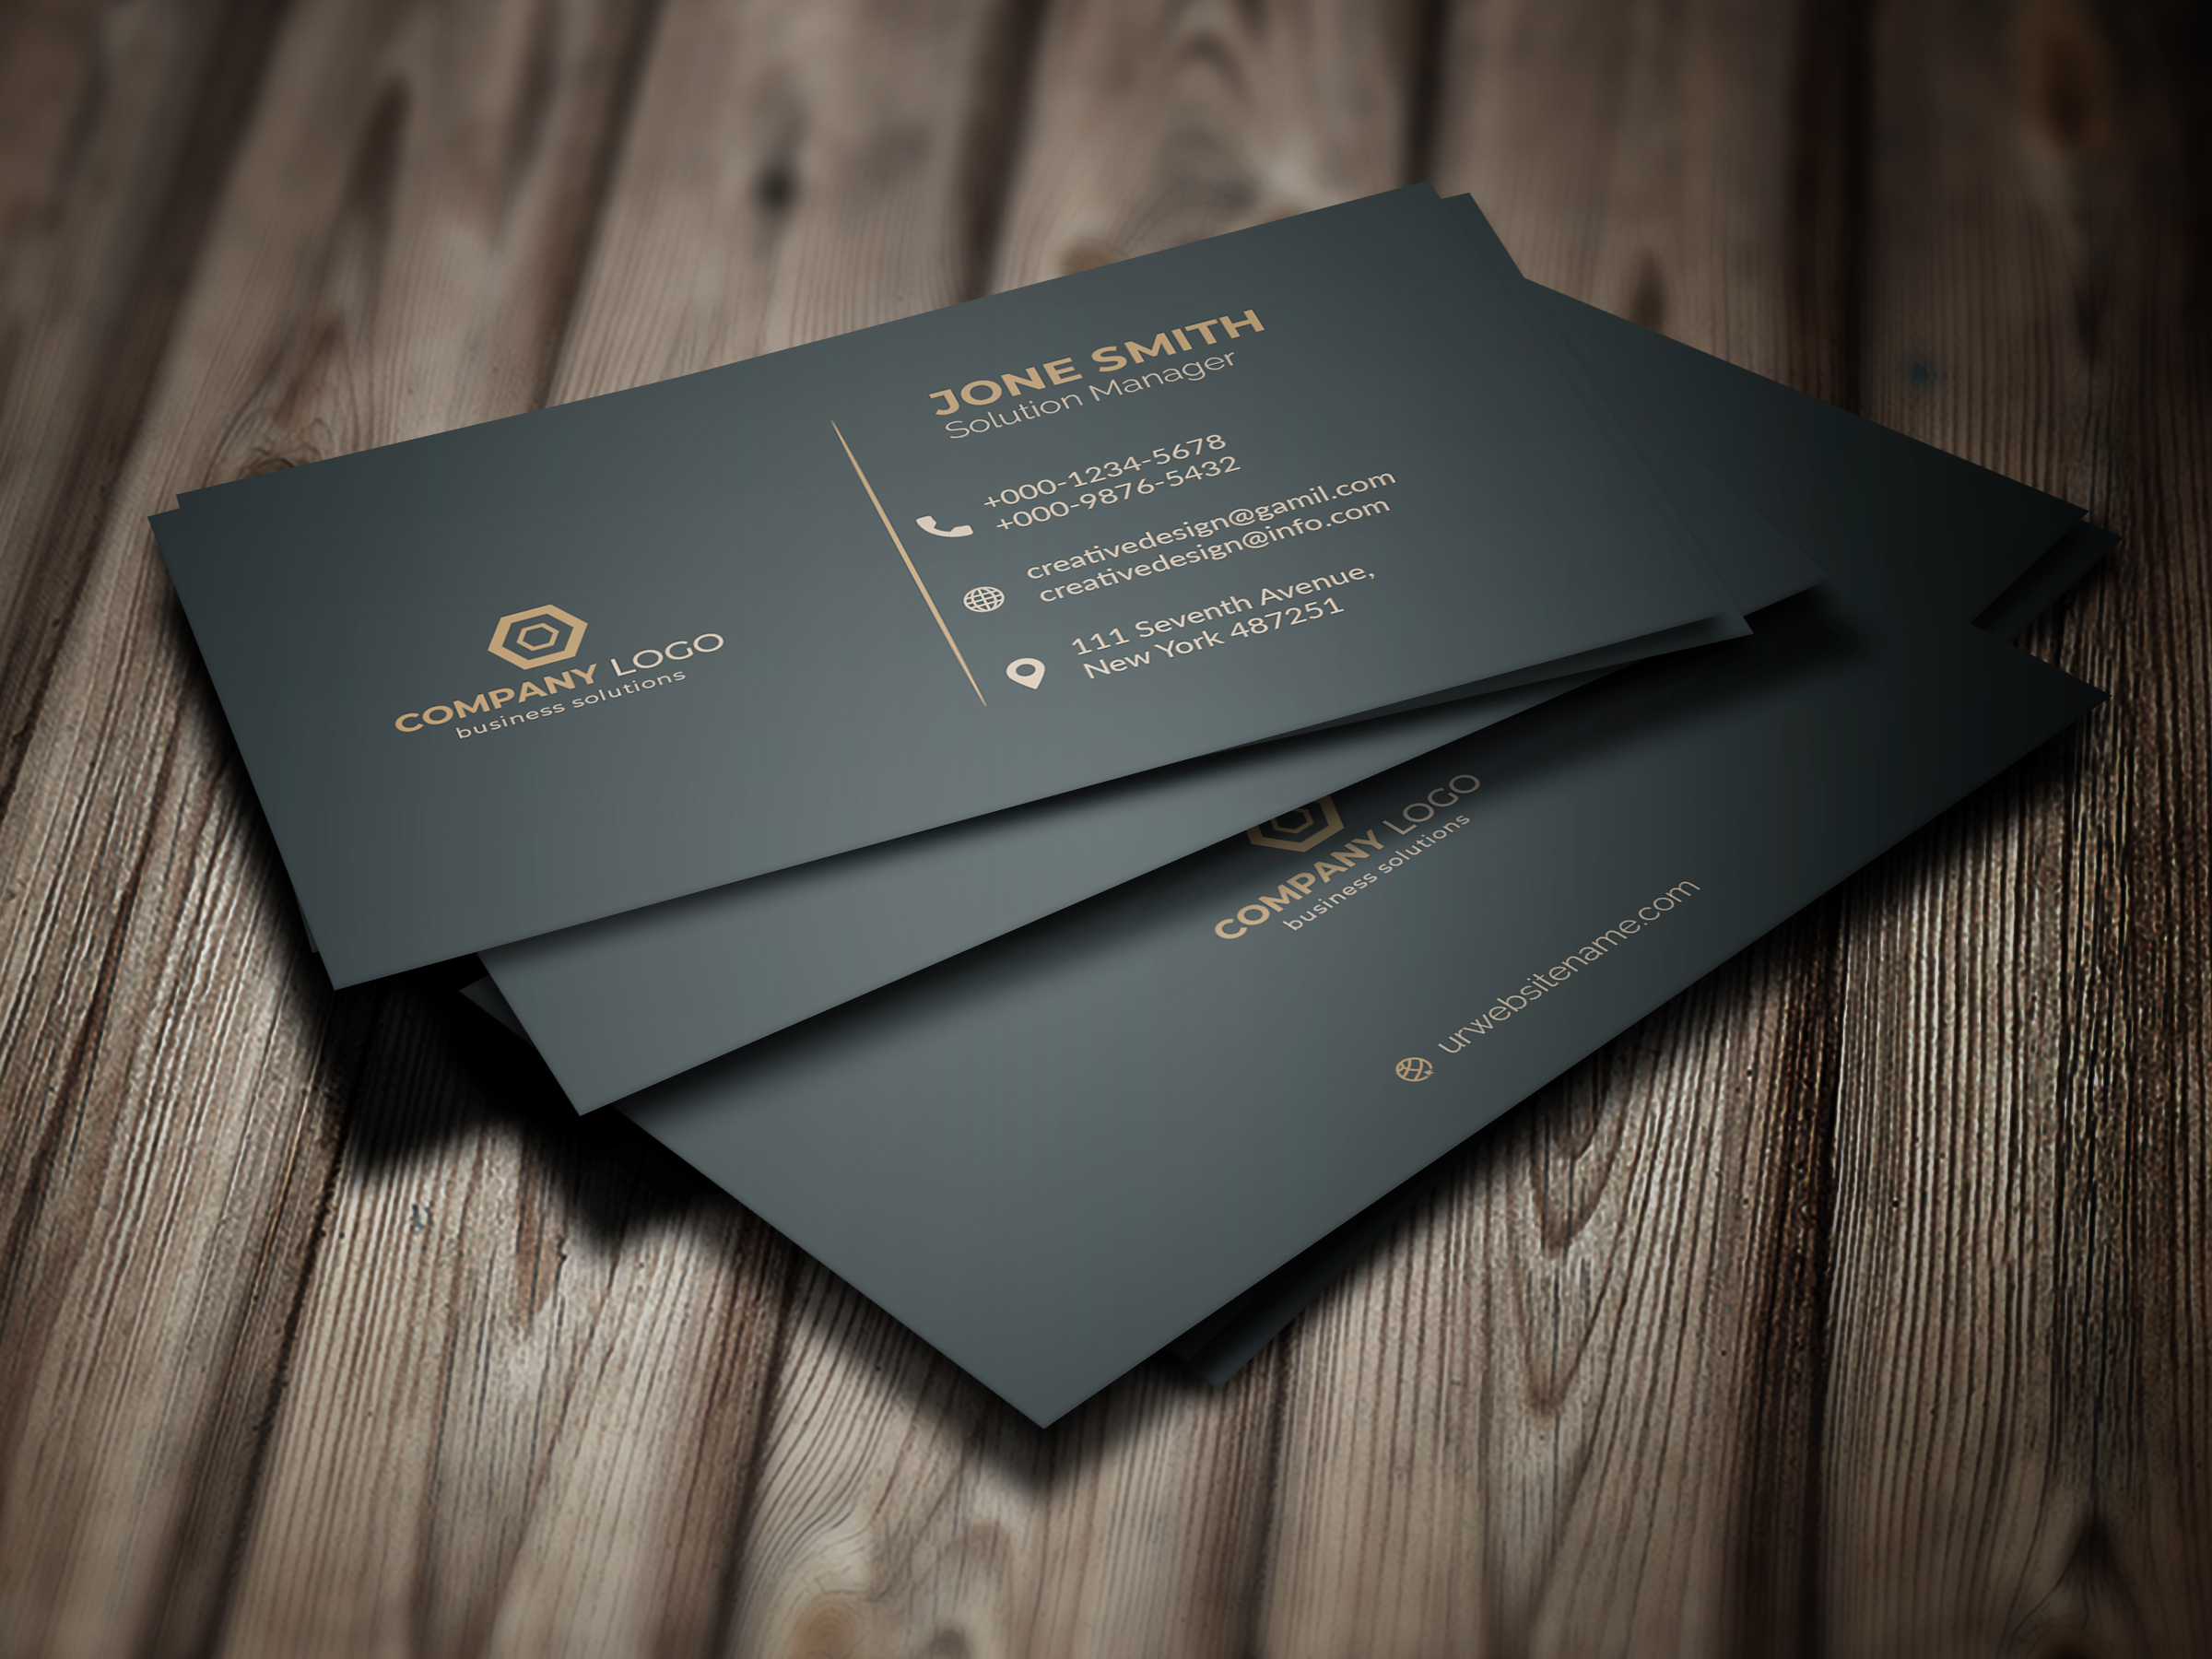 good company message for business cards 1